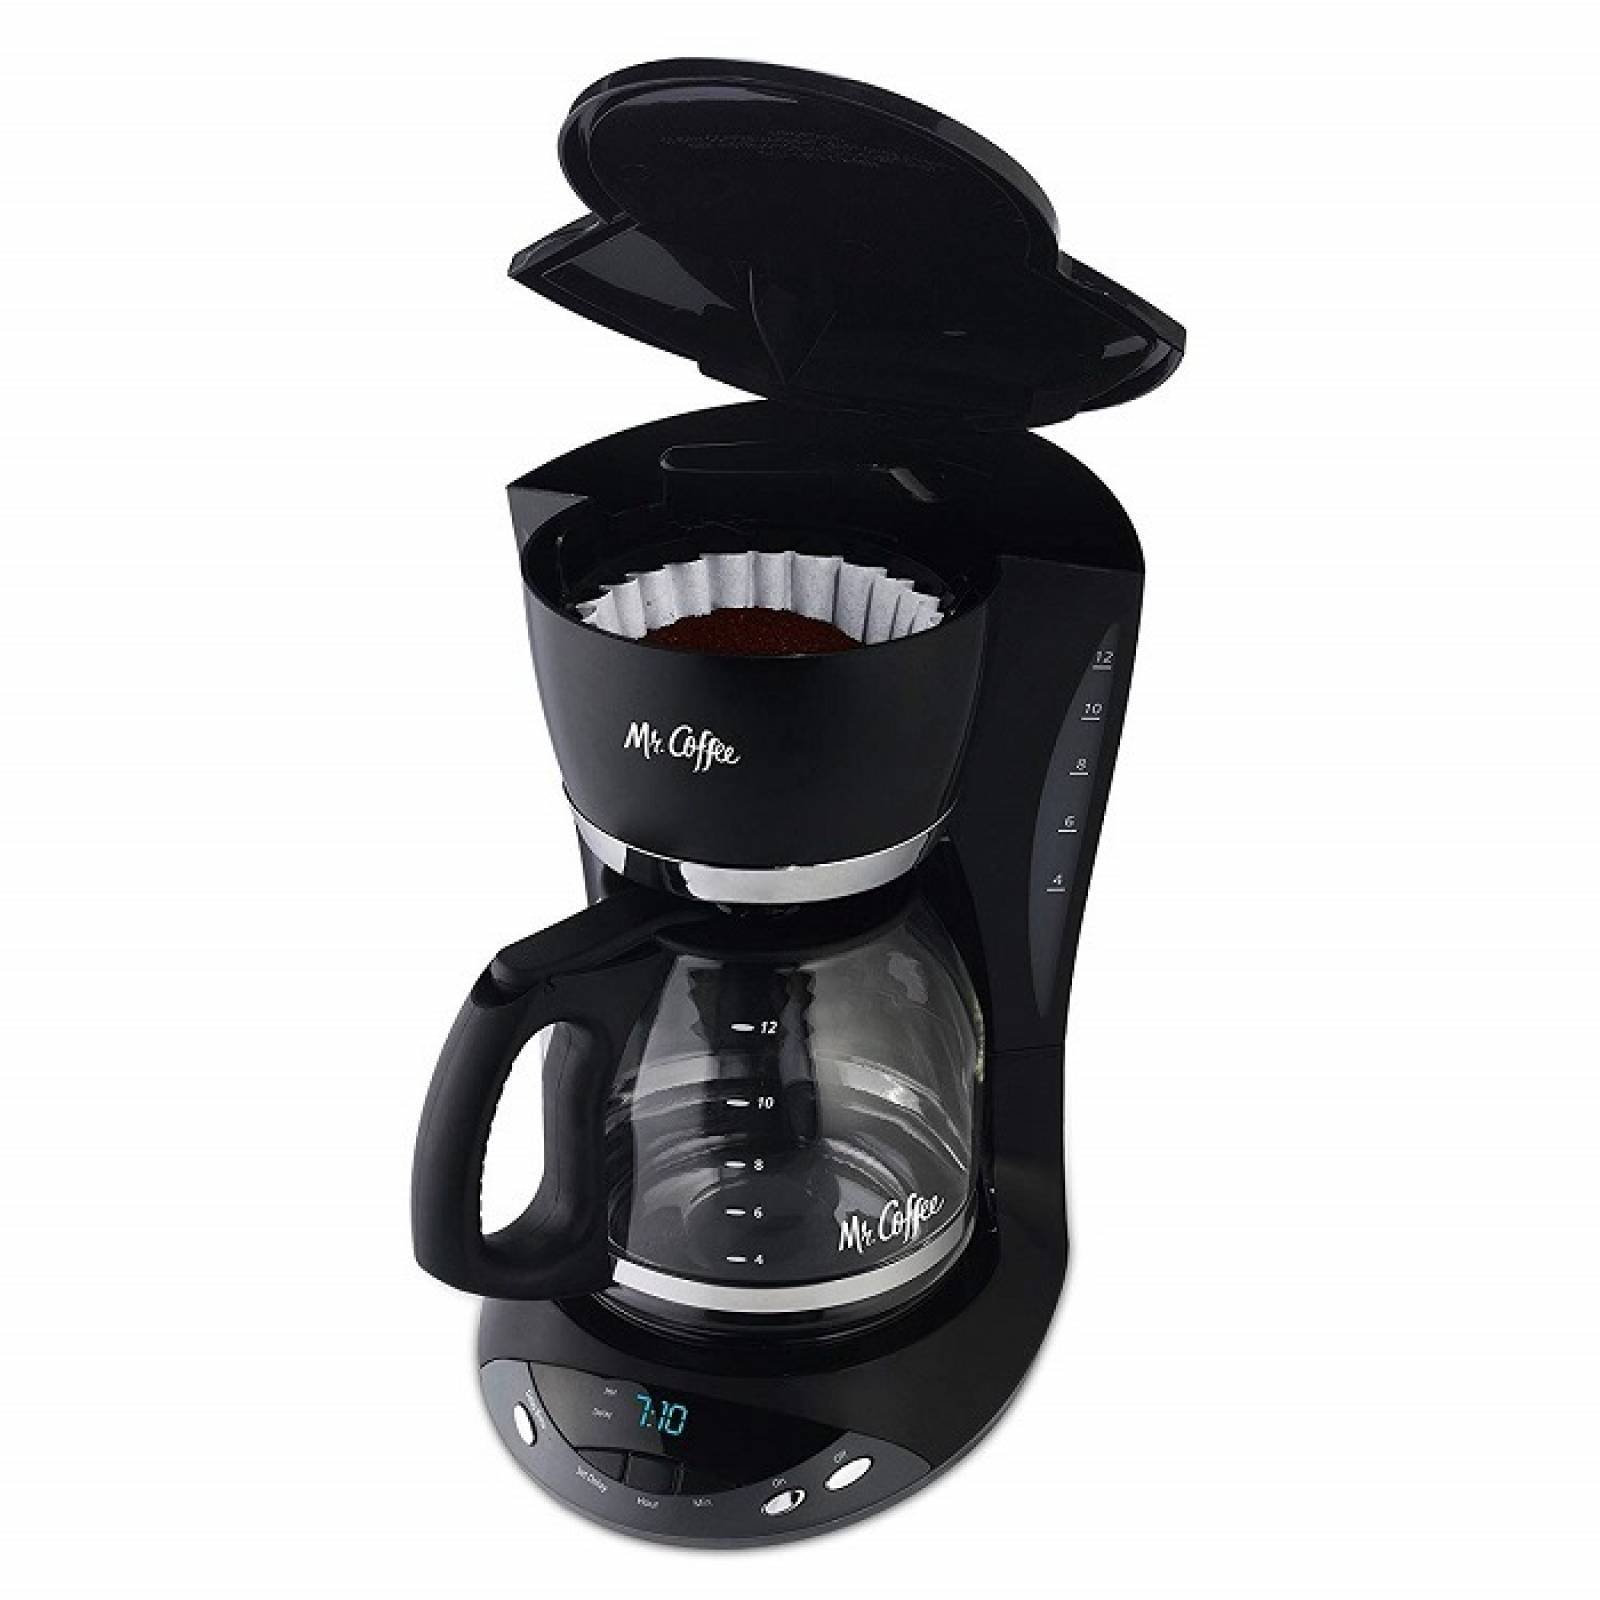 Cafetera Mr. Coffee Programable 12 tazas DWX23-RB